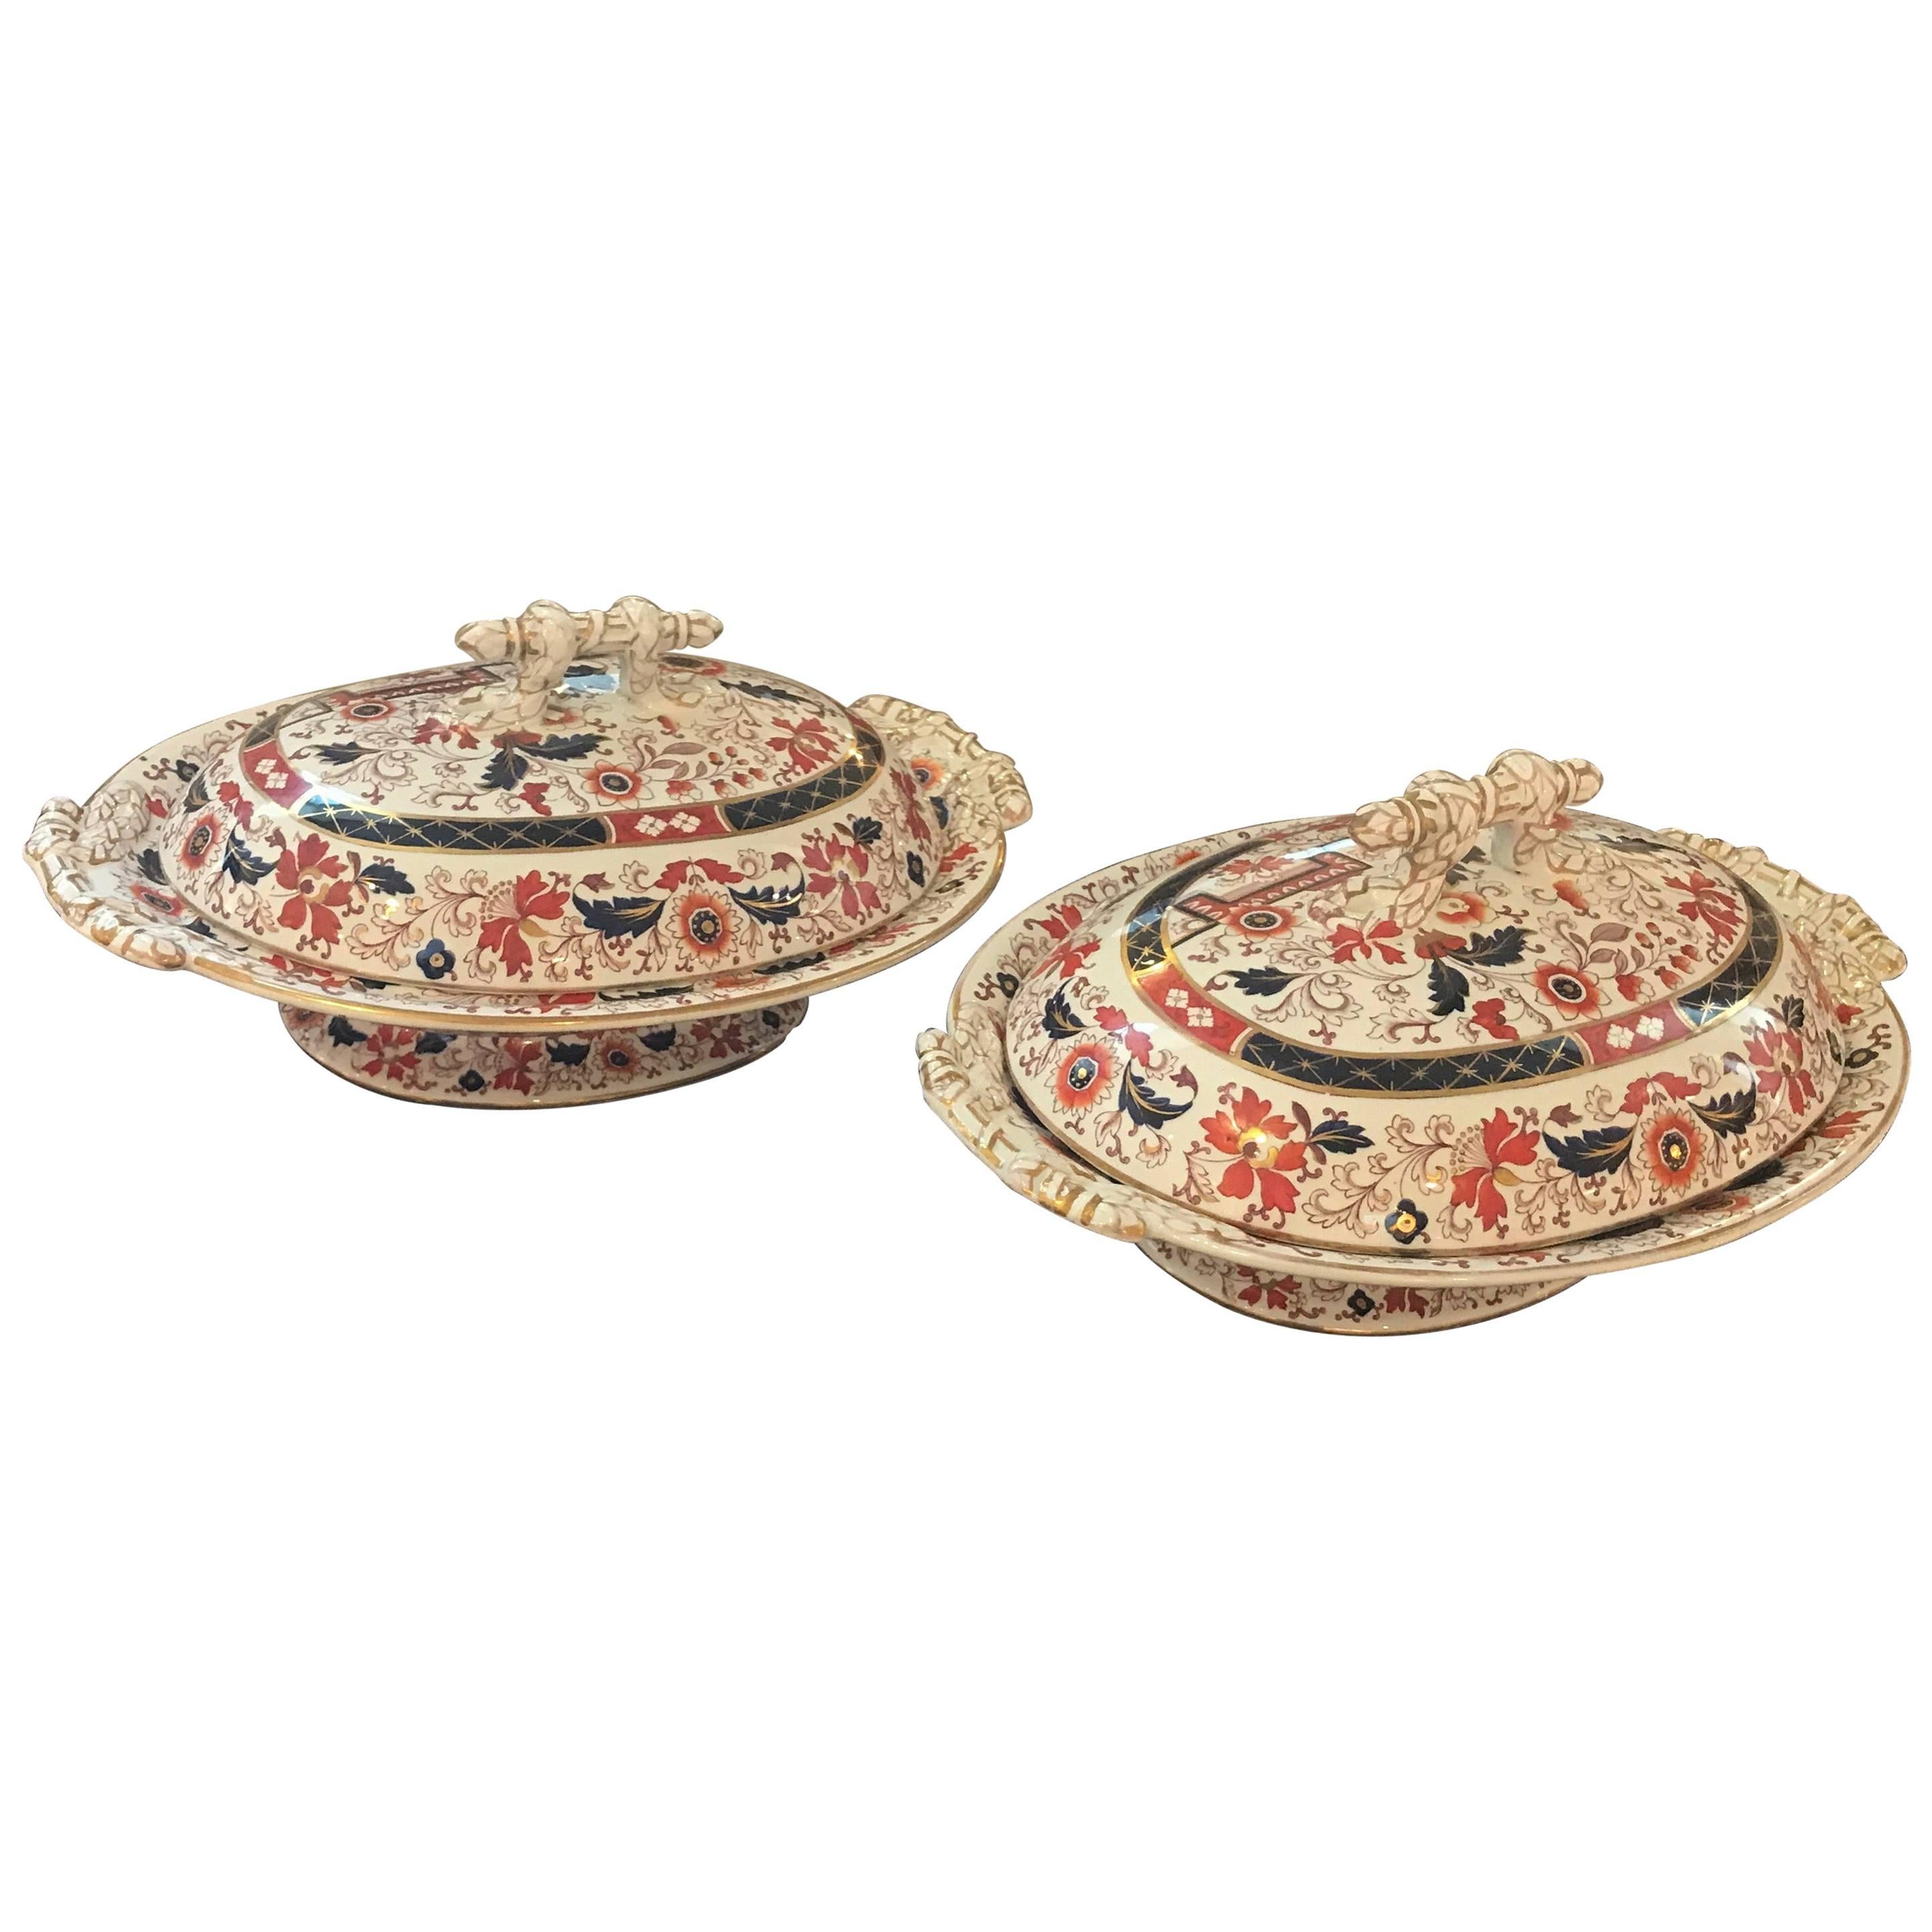 Pair of 19th Century Covered Dishes